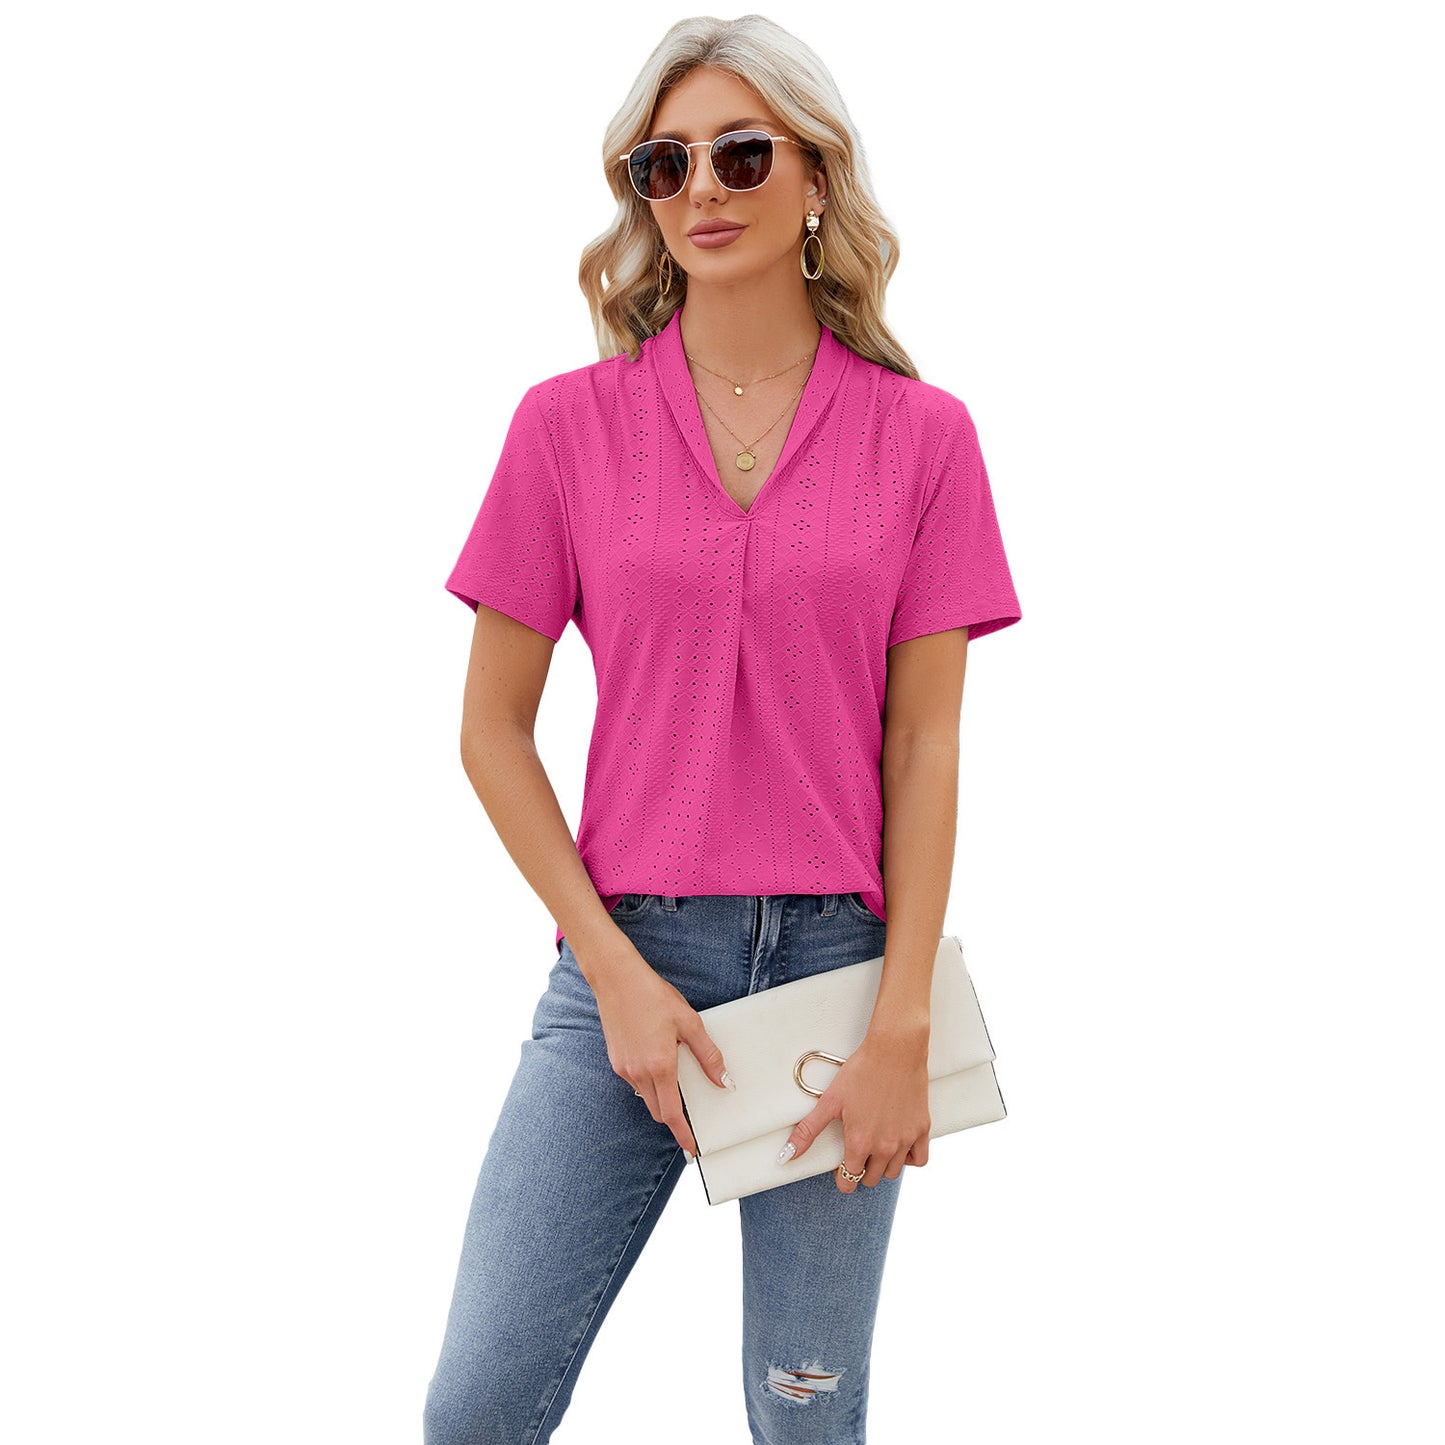 V-neck Hollow Design T-shirt Summer Loose Short-sleeved Top For Womens Clothing apparel & accessories